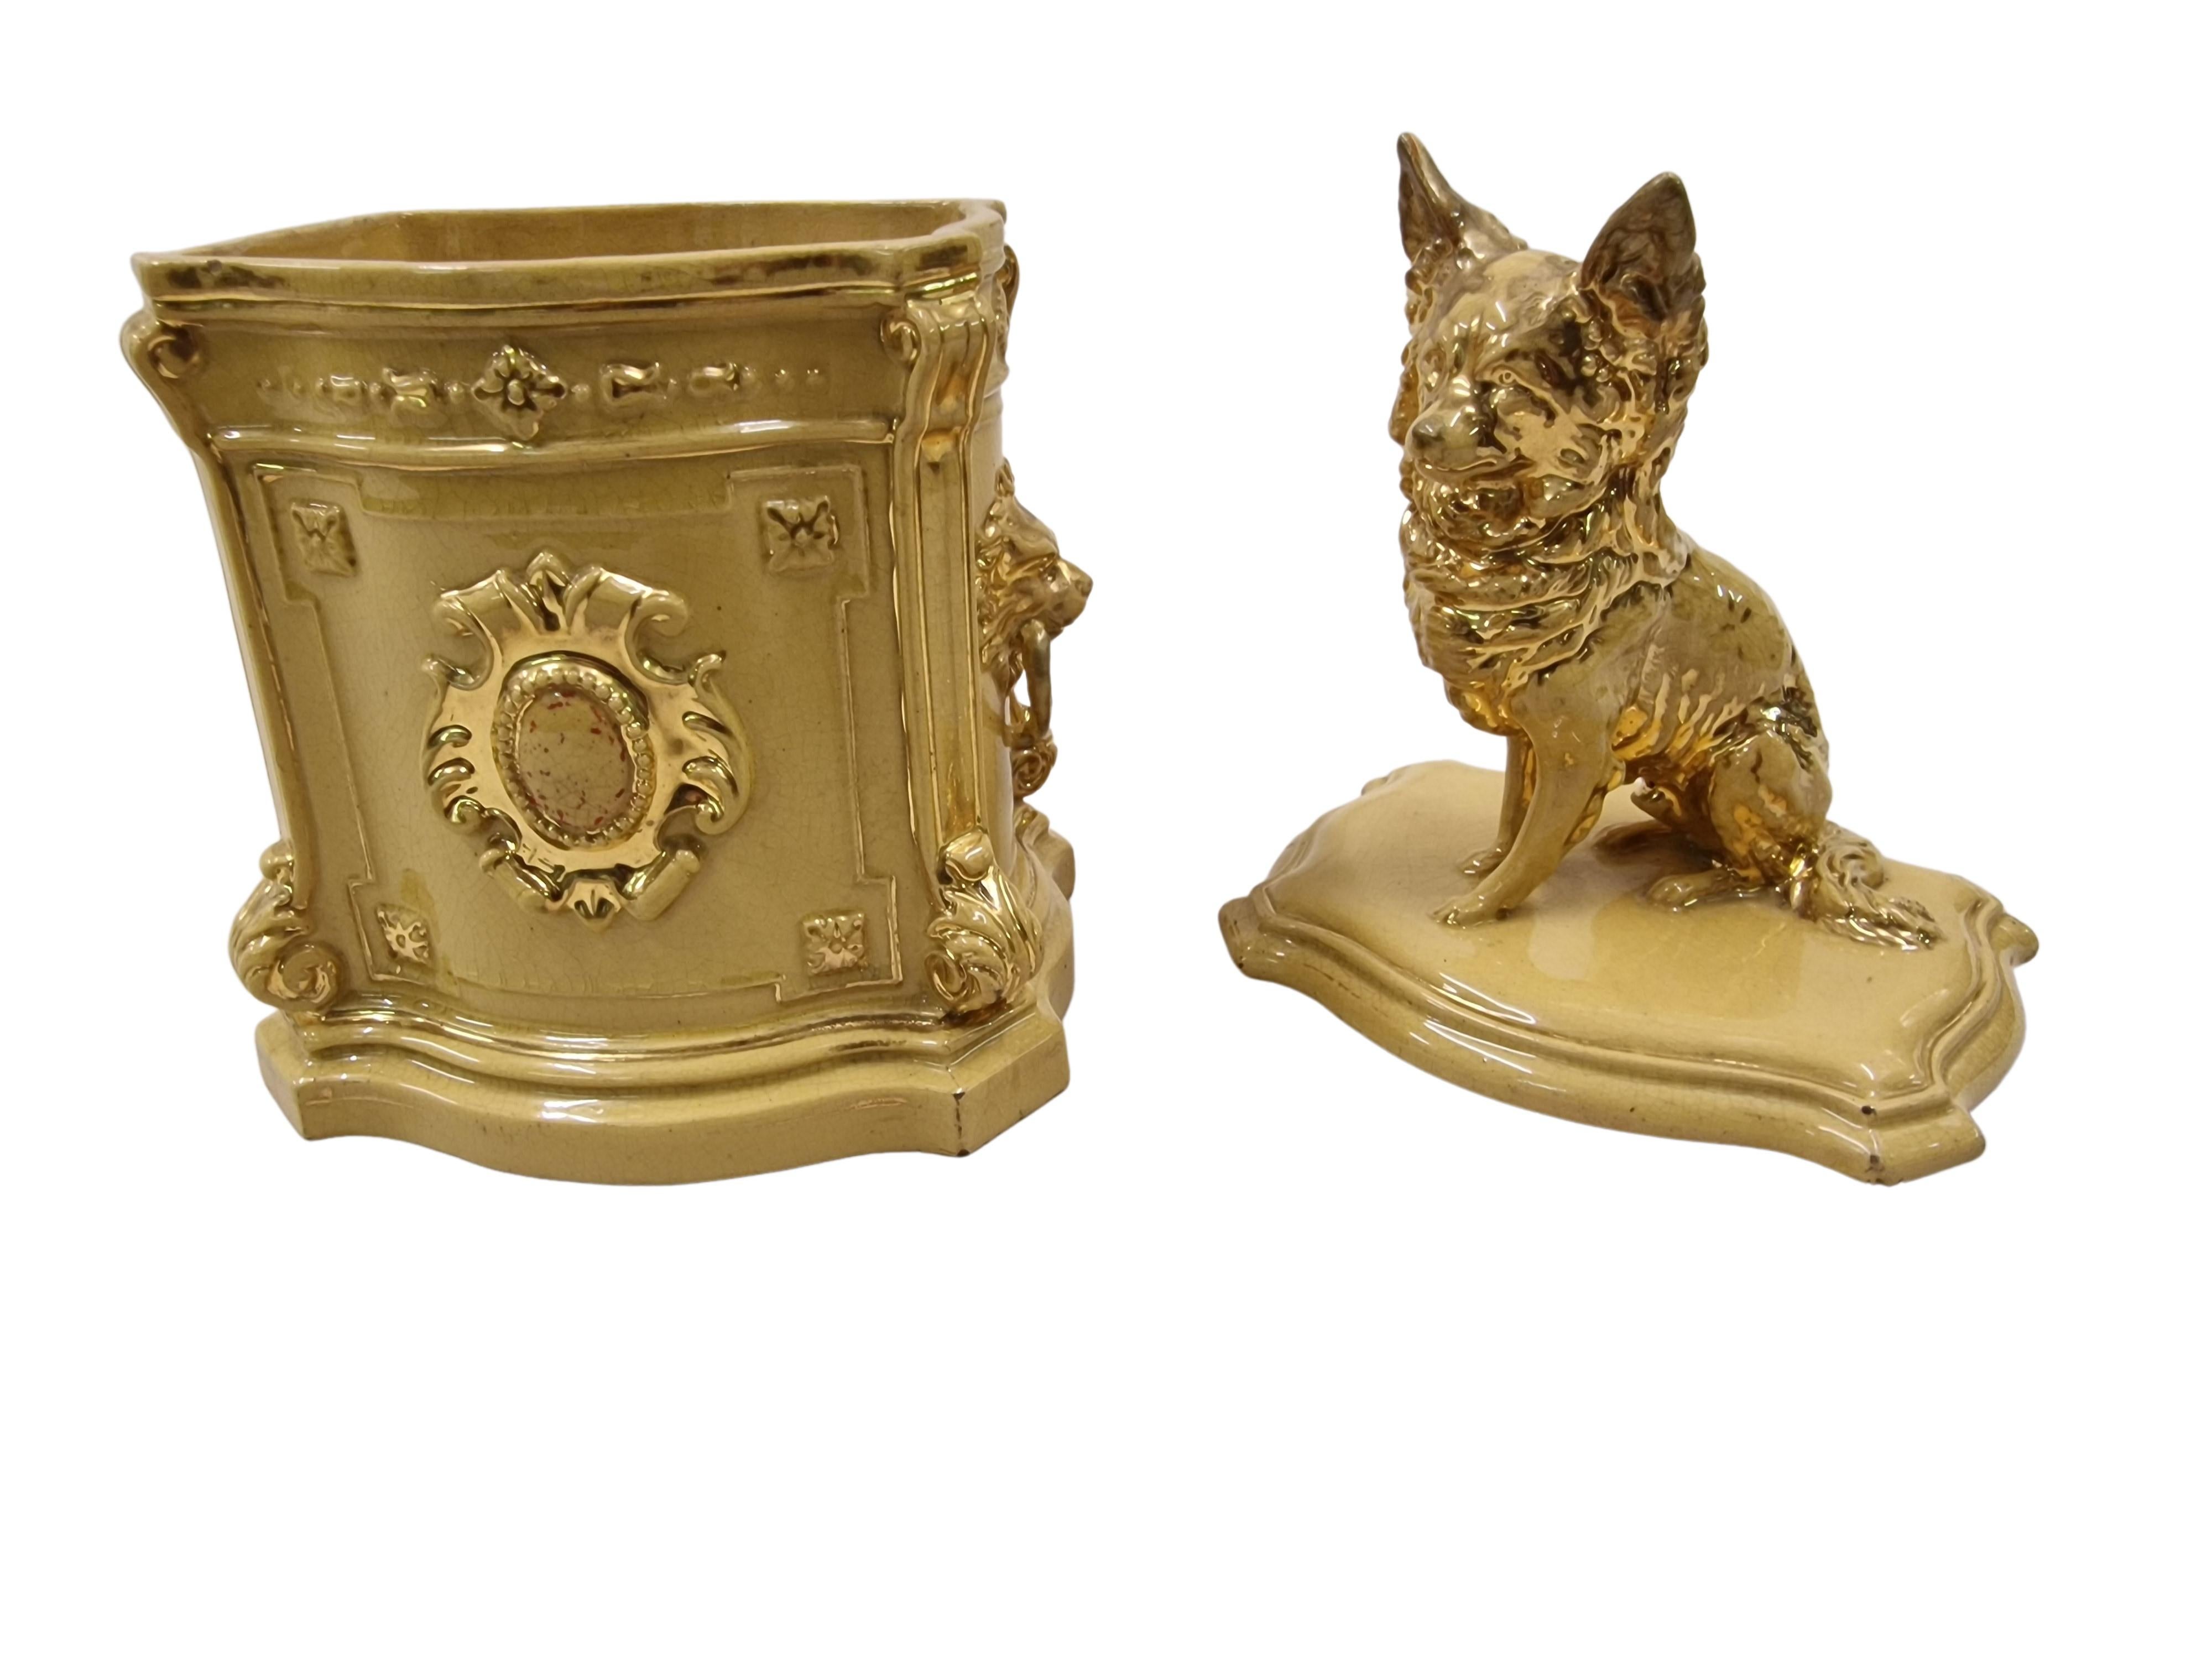 Very magnificent glazed ceramic tobacco box, an original from the end of the 19th century, by Bernhard Bloch, from Bohemia / Austria.

The box is wonderfully elaborated with a base that has a lot of baroque décor and a lid on which a dog is